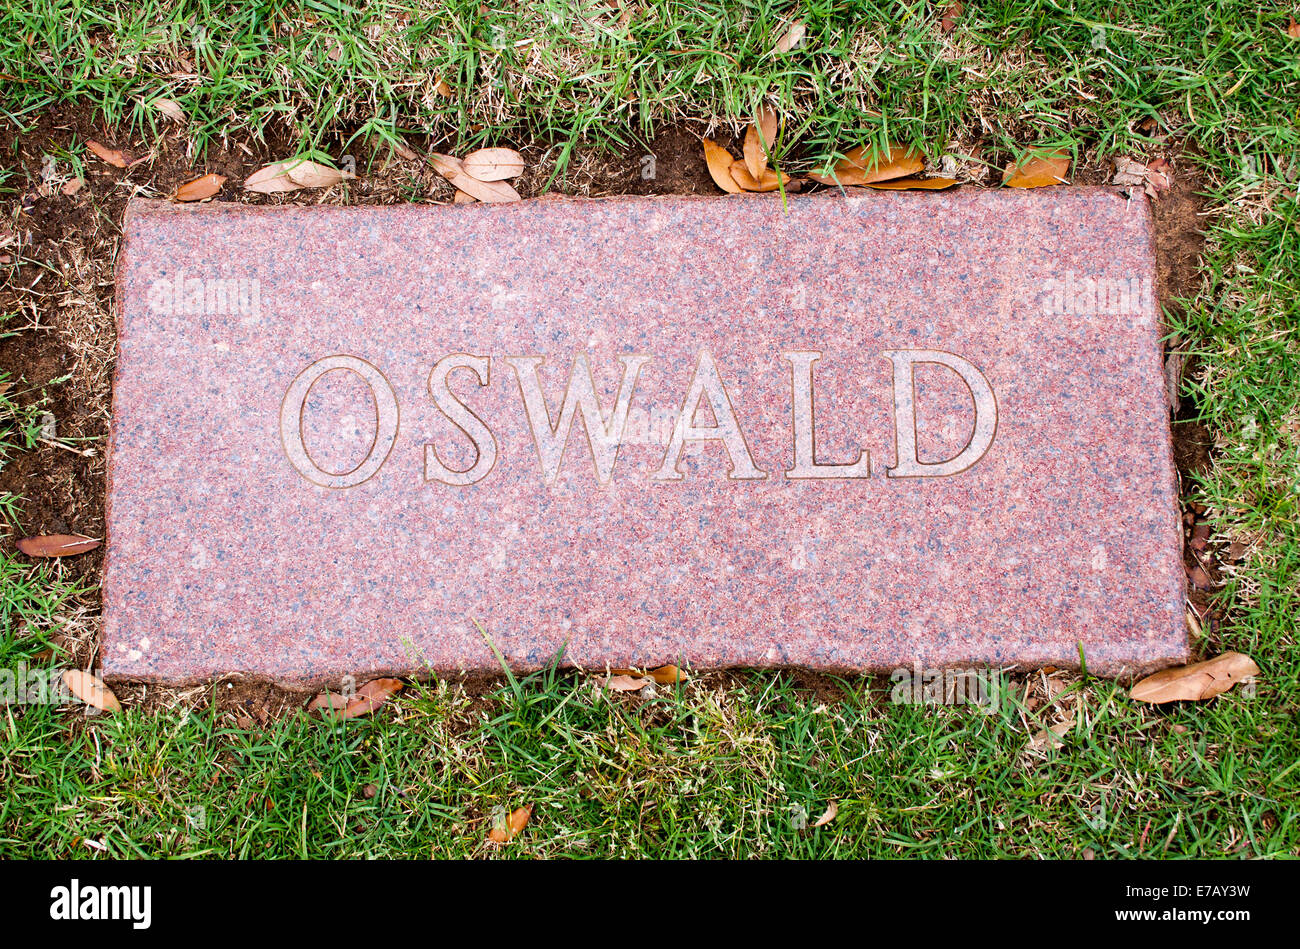 Harvey Oswald grave in Fort Worth Texas Stock Photo - Alamy